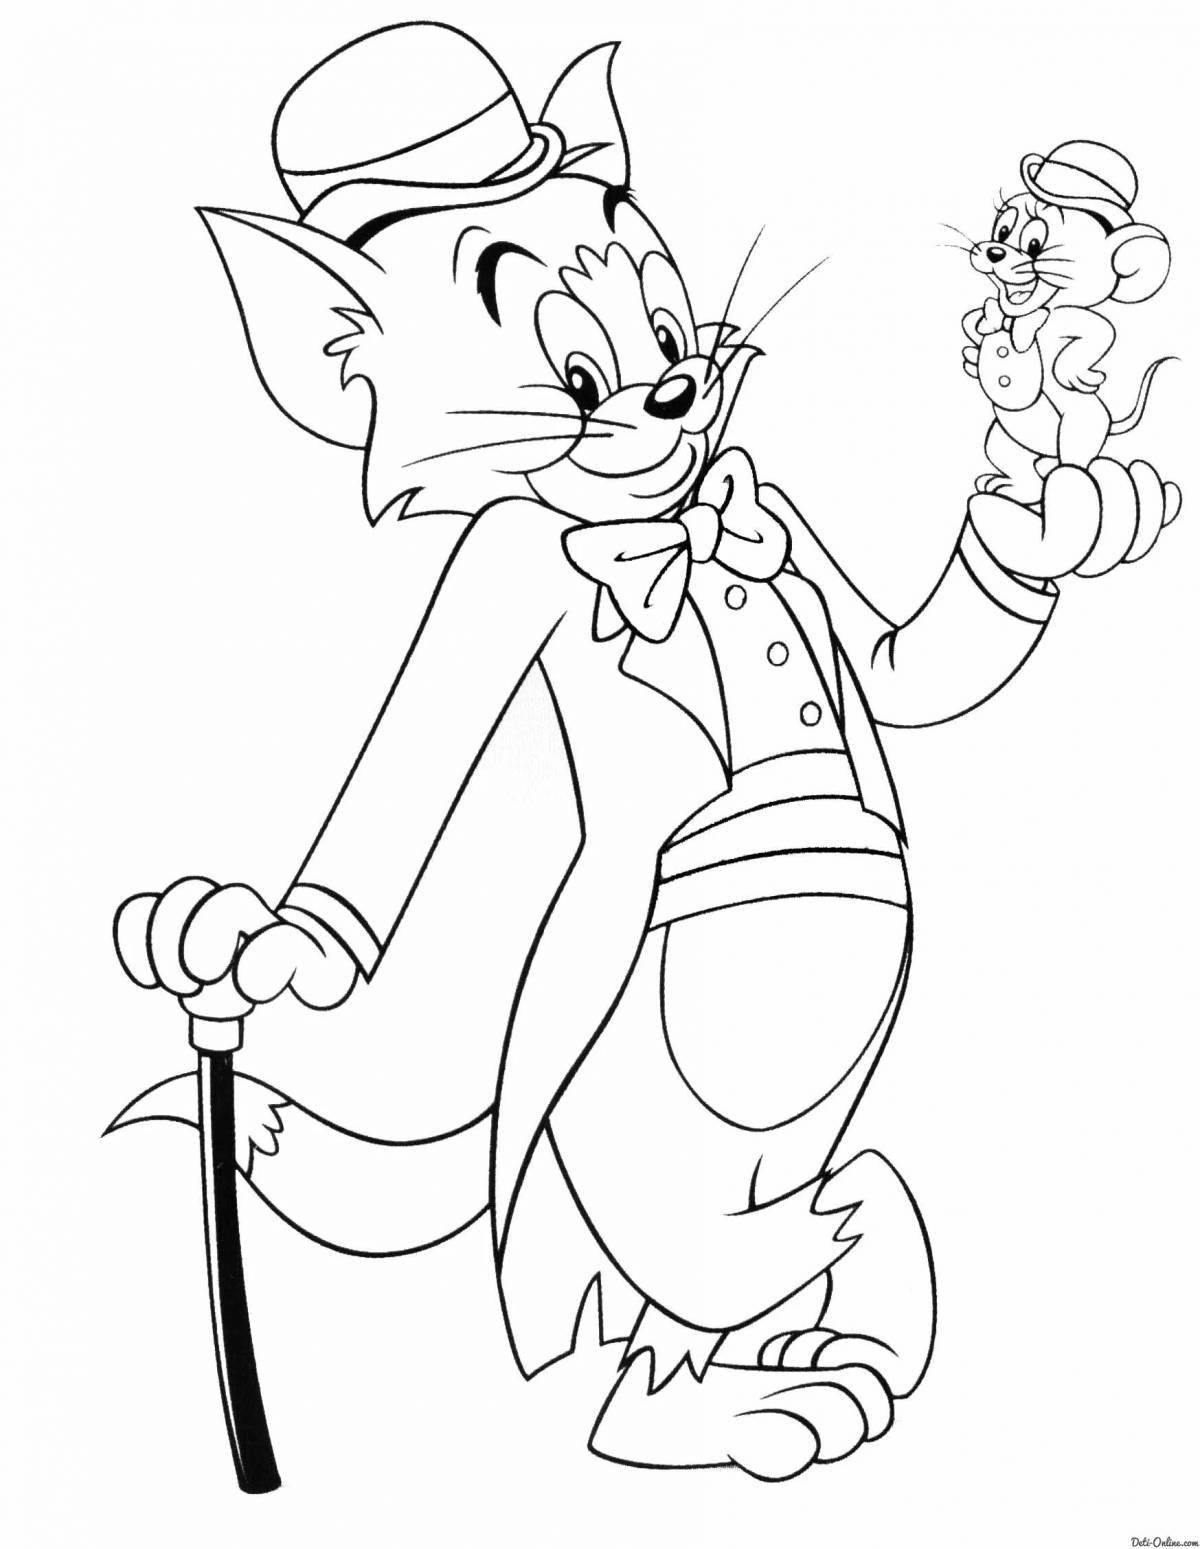 Cute tom and jerry coloring book